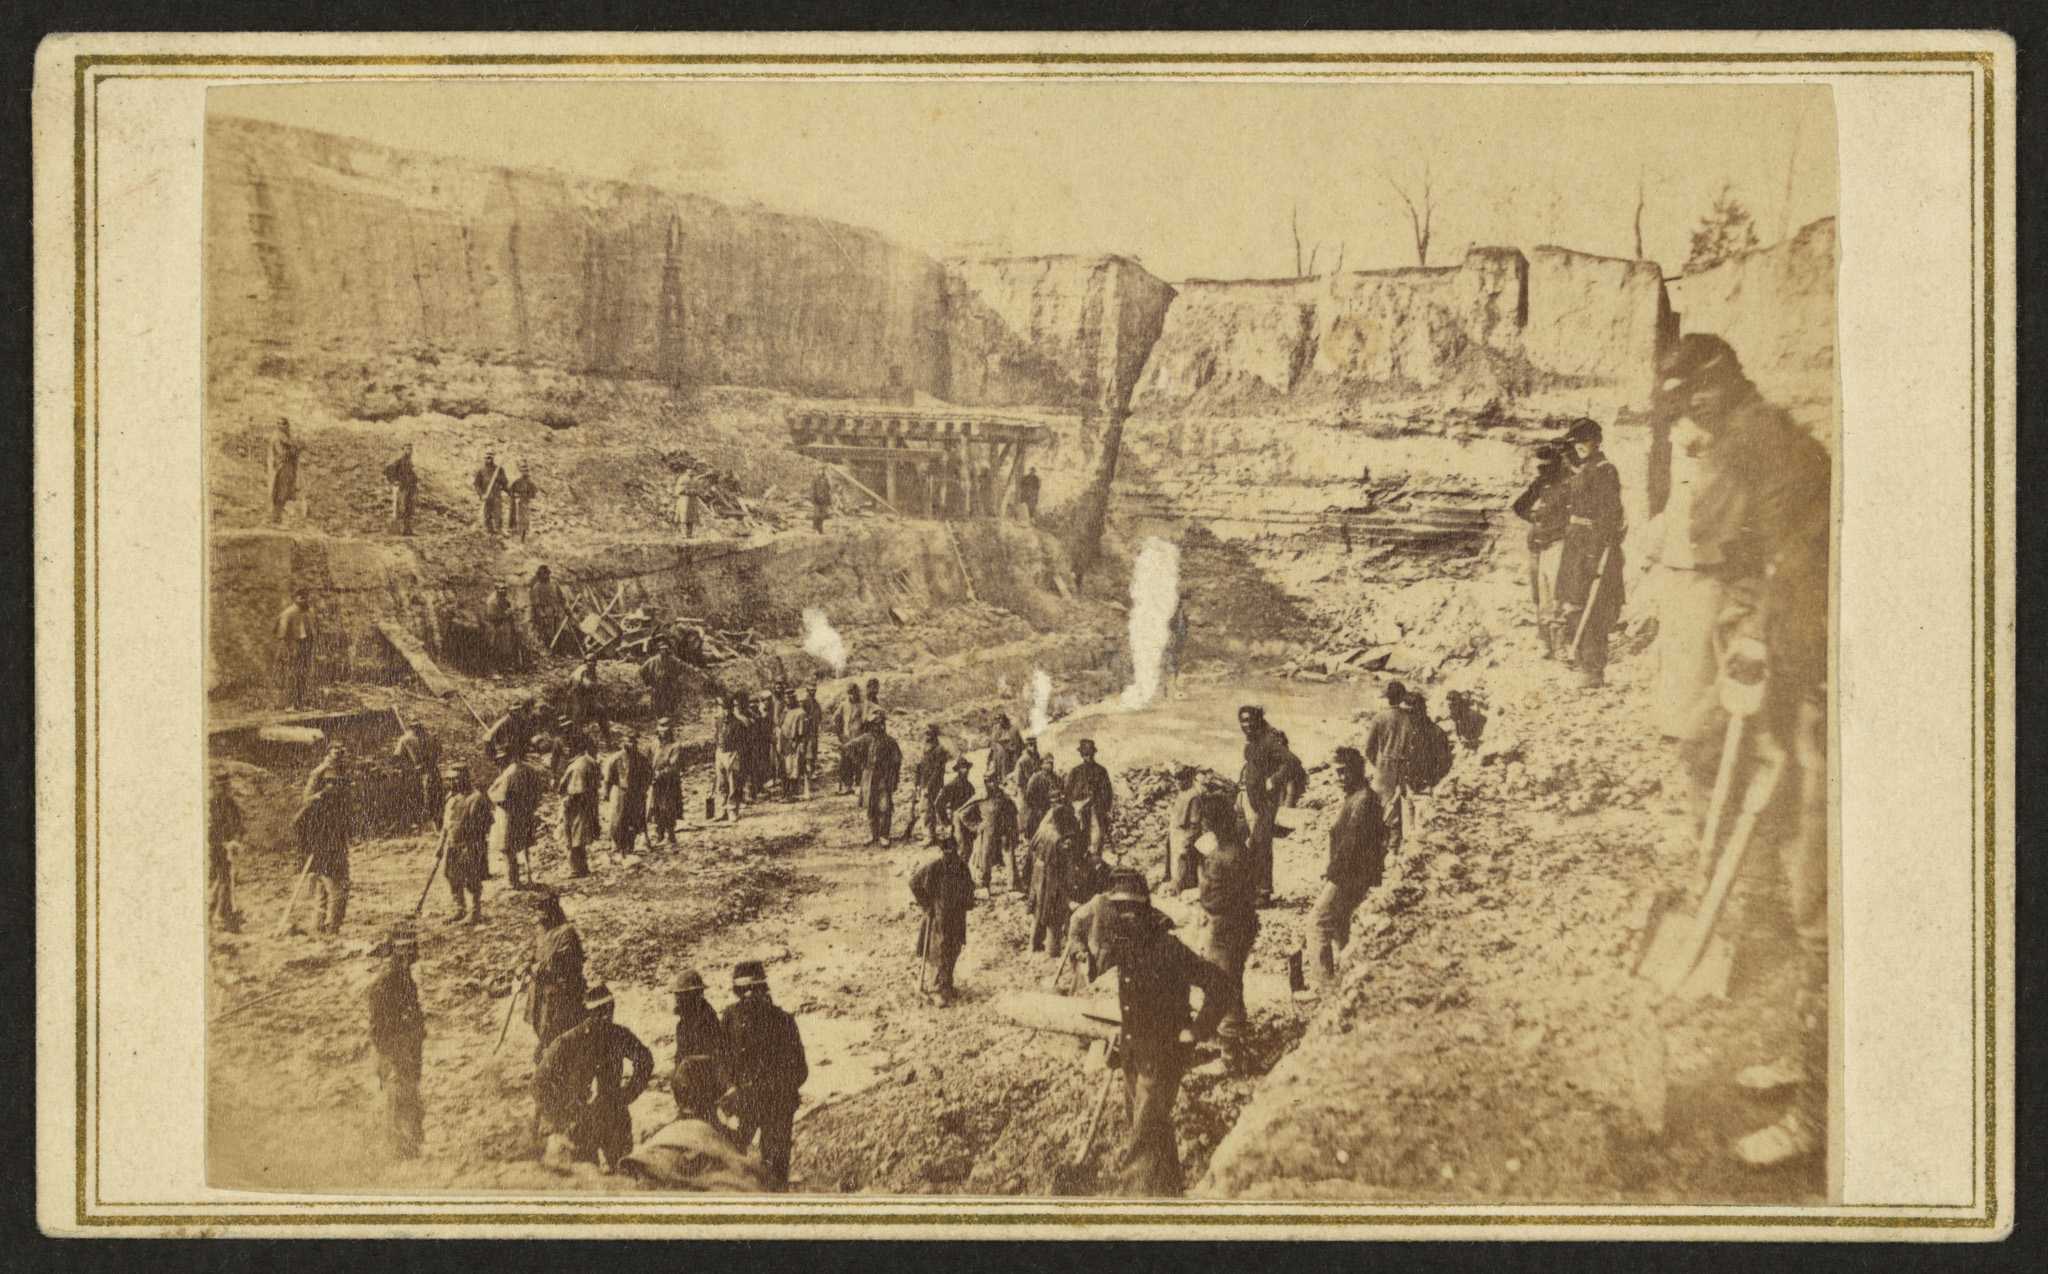 Photograph of African Americans digging the Dutch Gap Canal